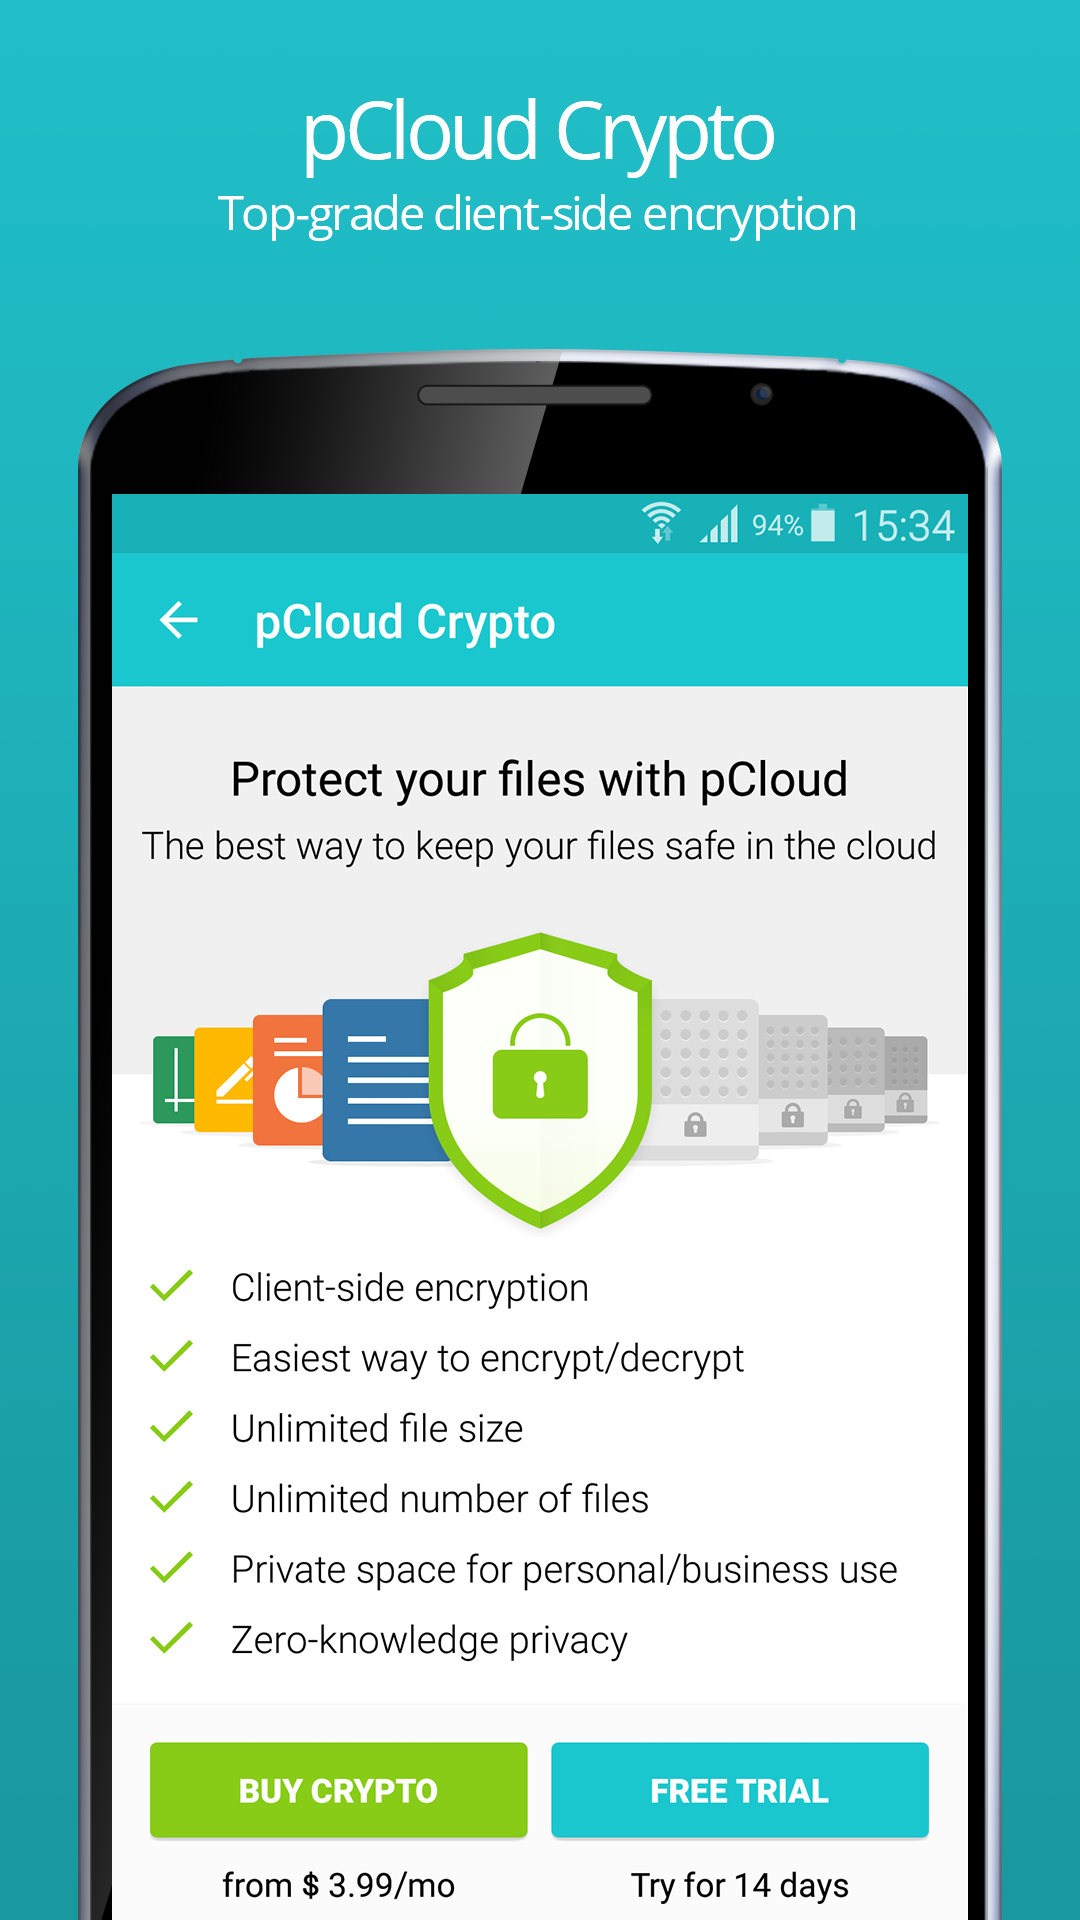 pCloud Business Software - Users can purchase the pCloud Crypto add-on to encrypt their files